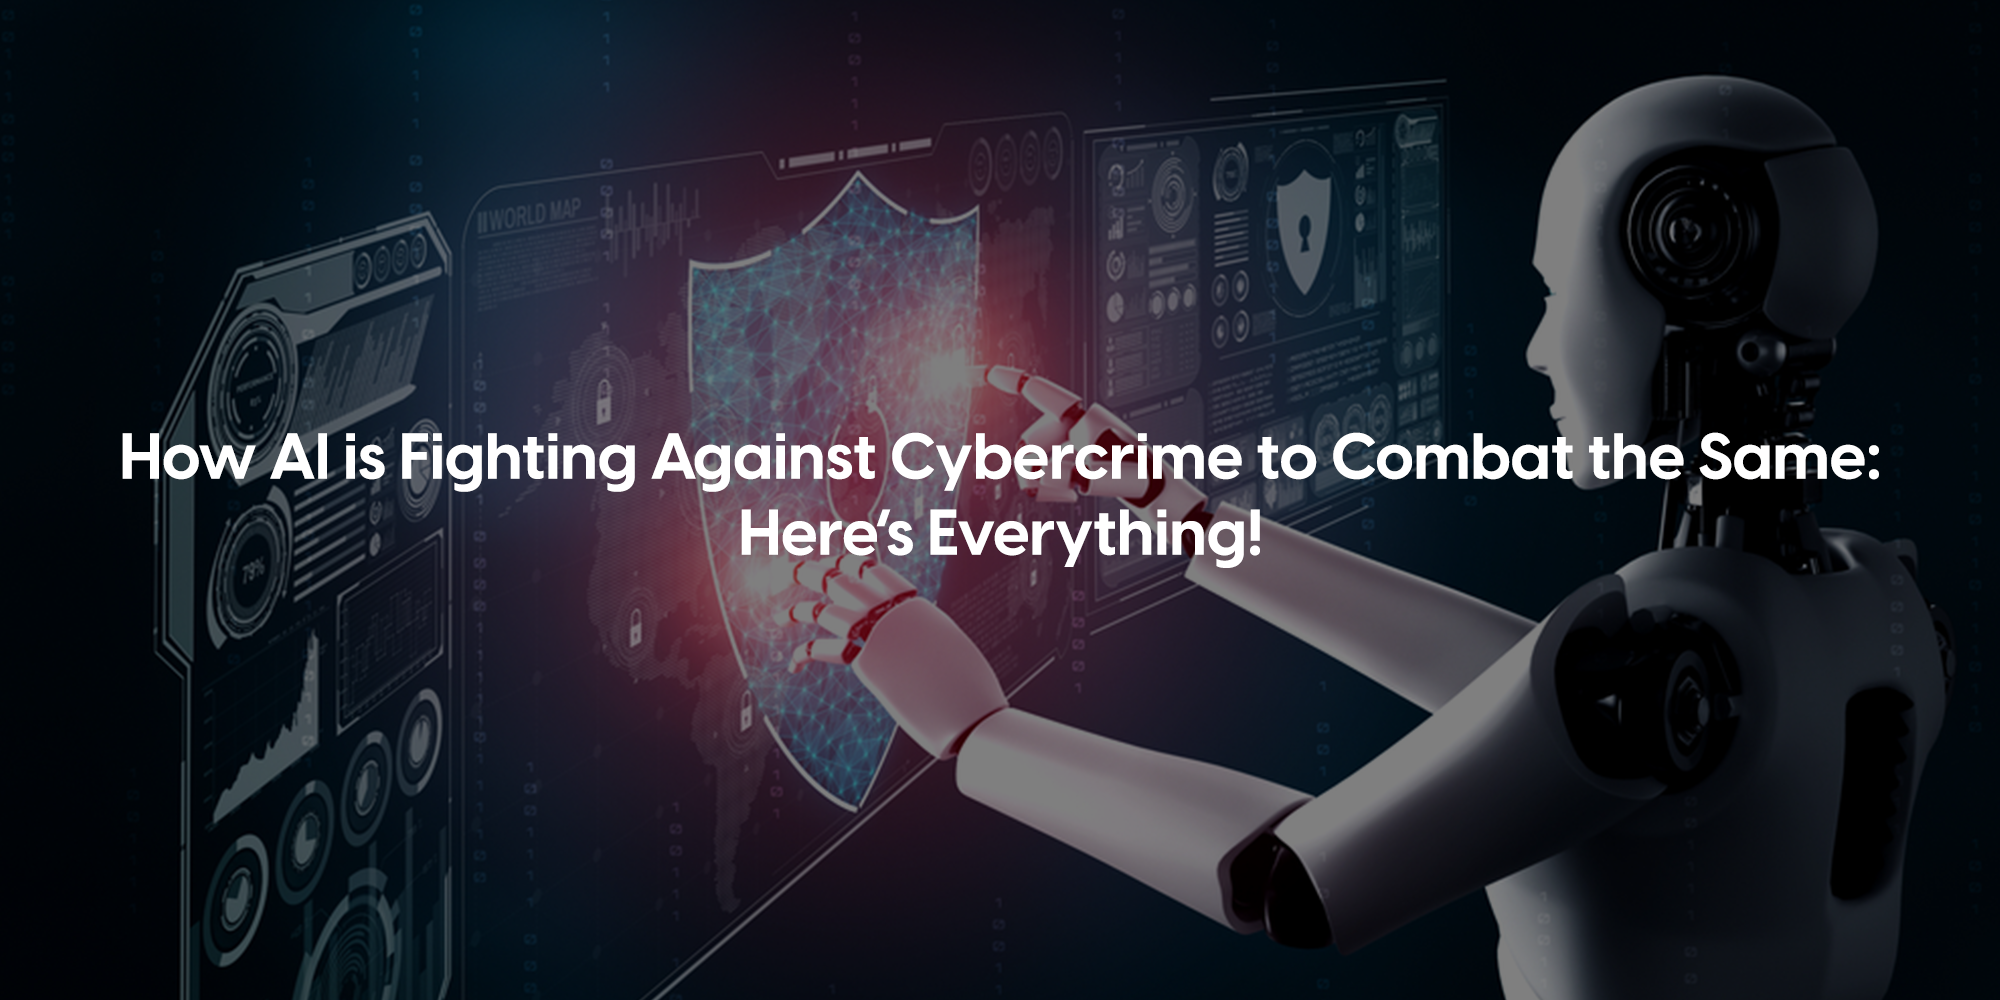 How AI is Fighting Against Cybercrime to Combat the Same: Here’s Everything!